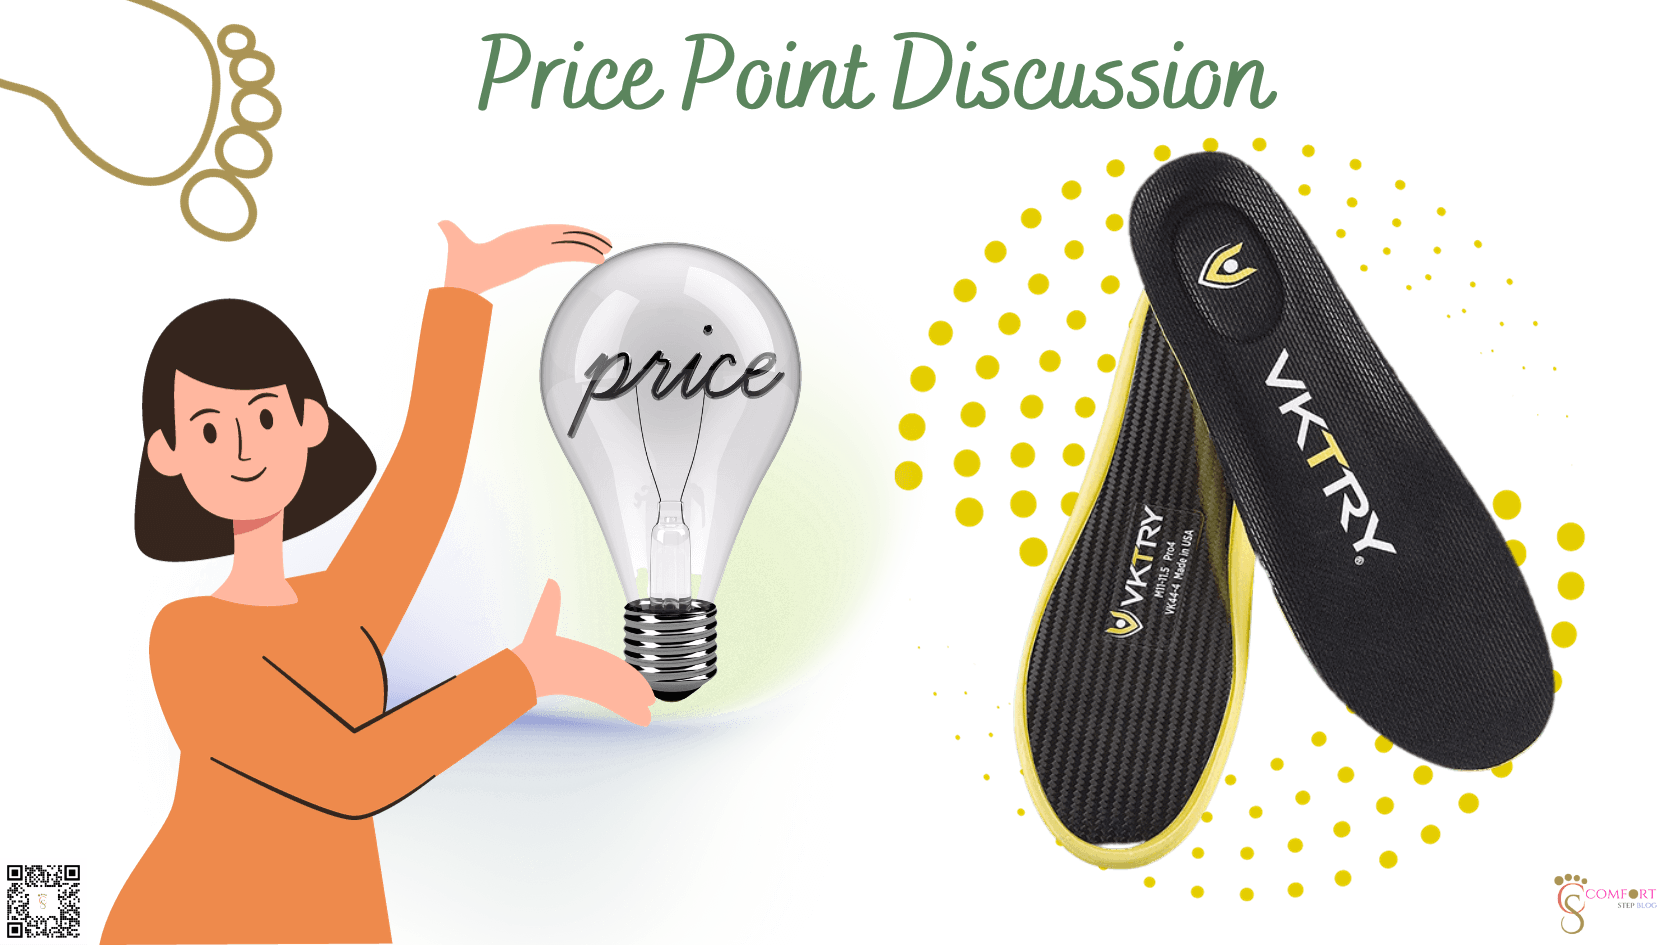 Price Point Discussion